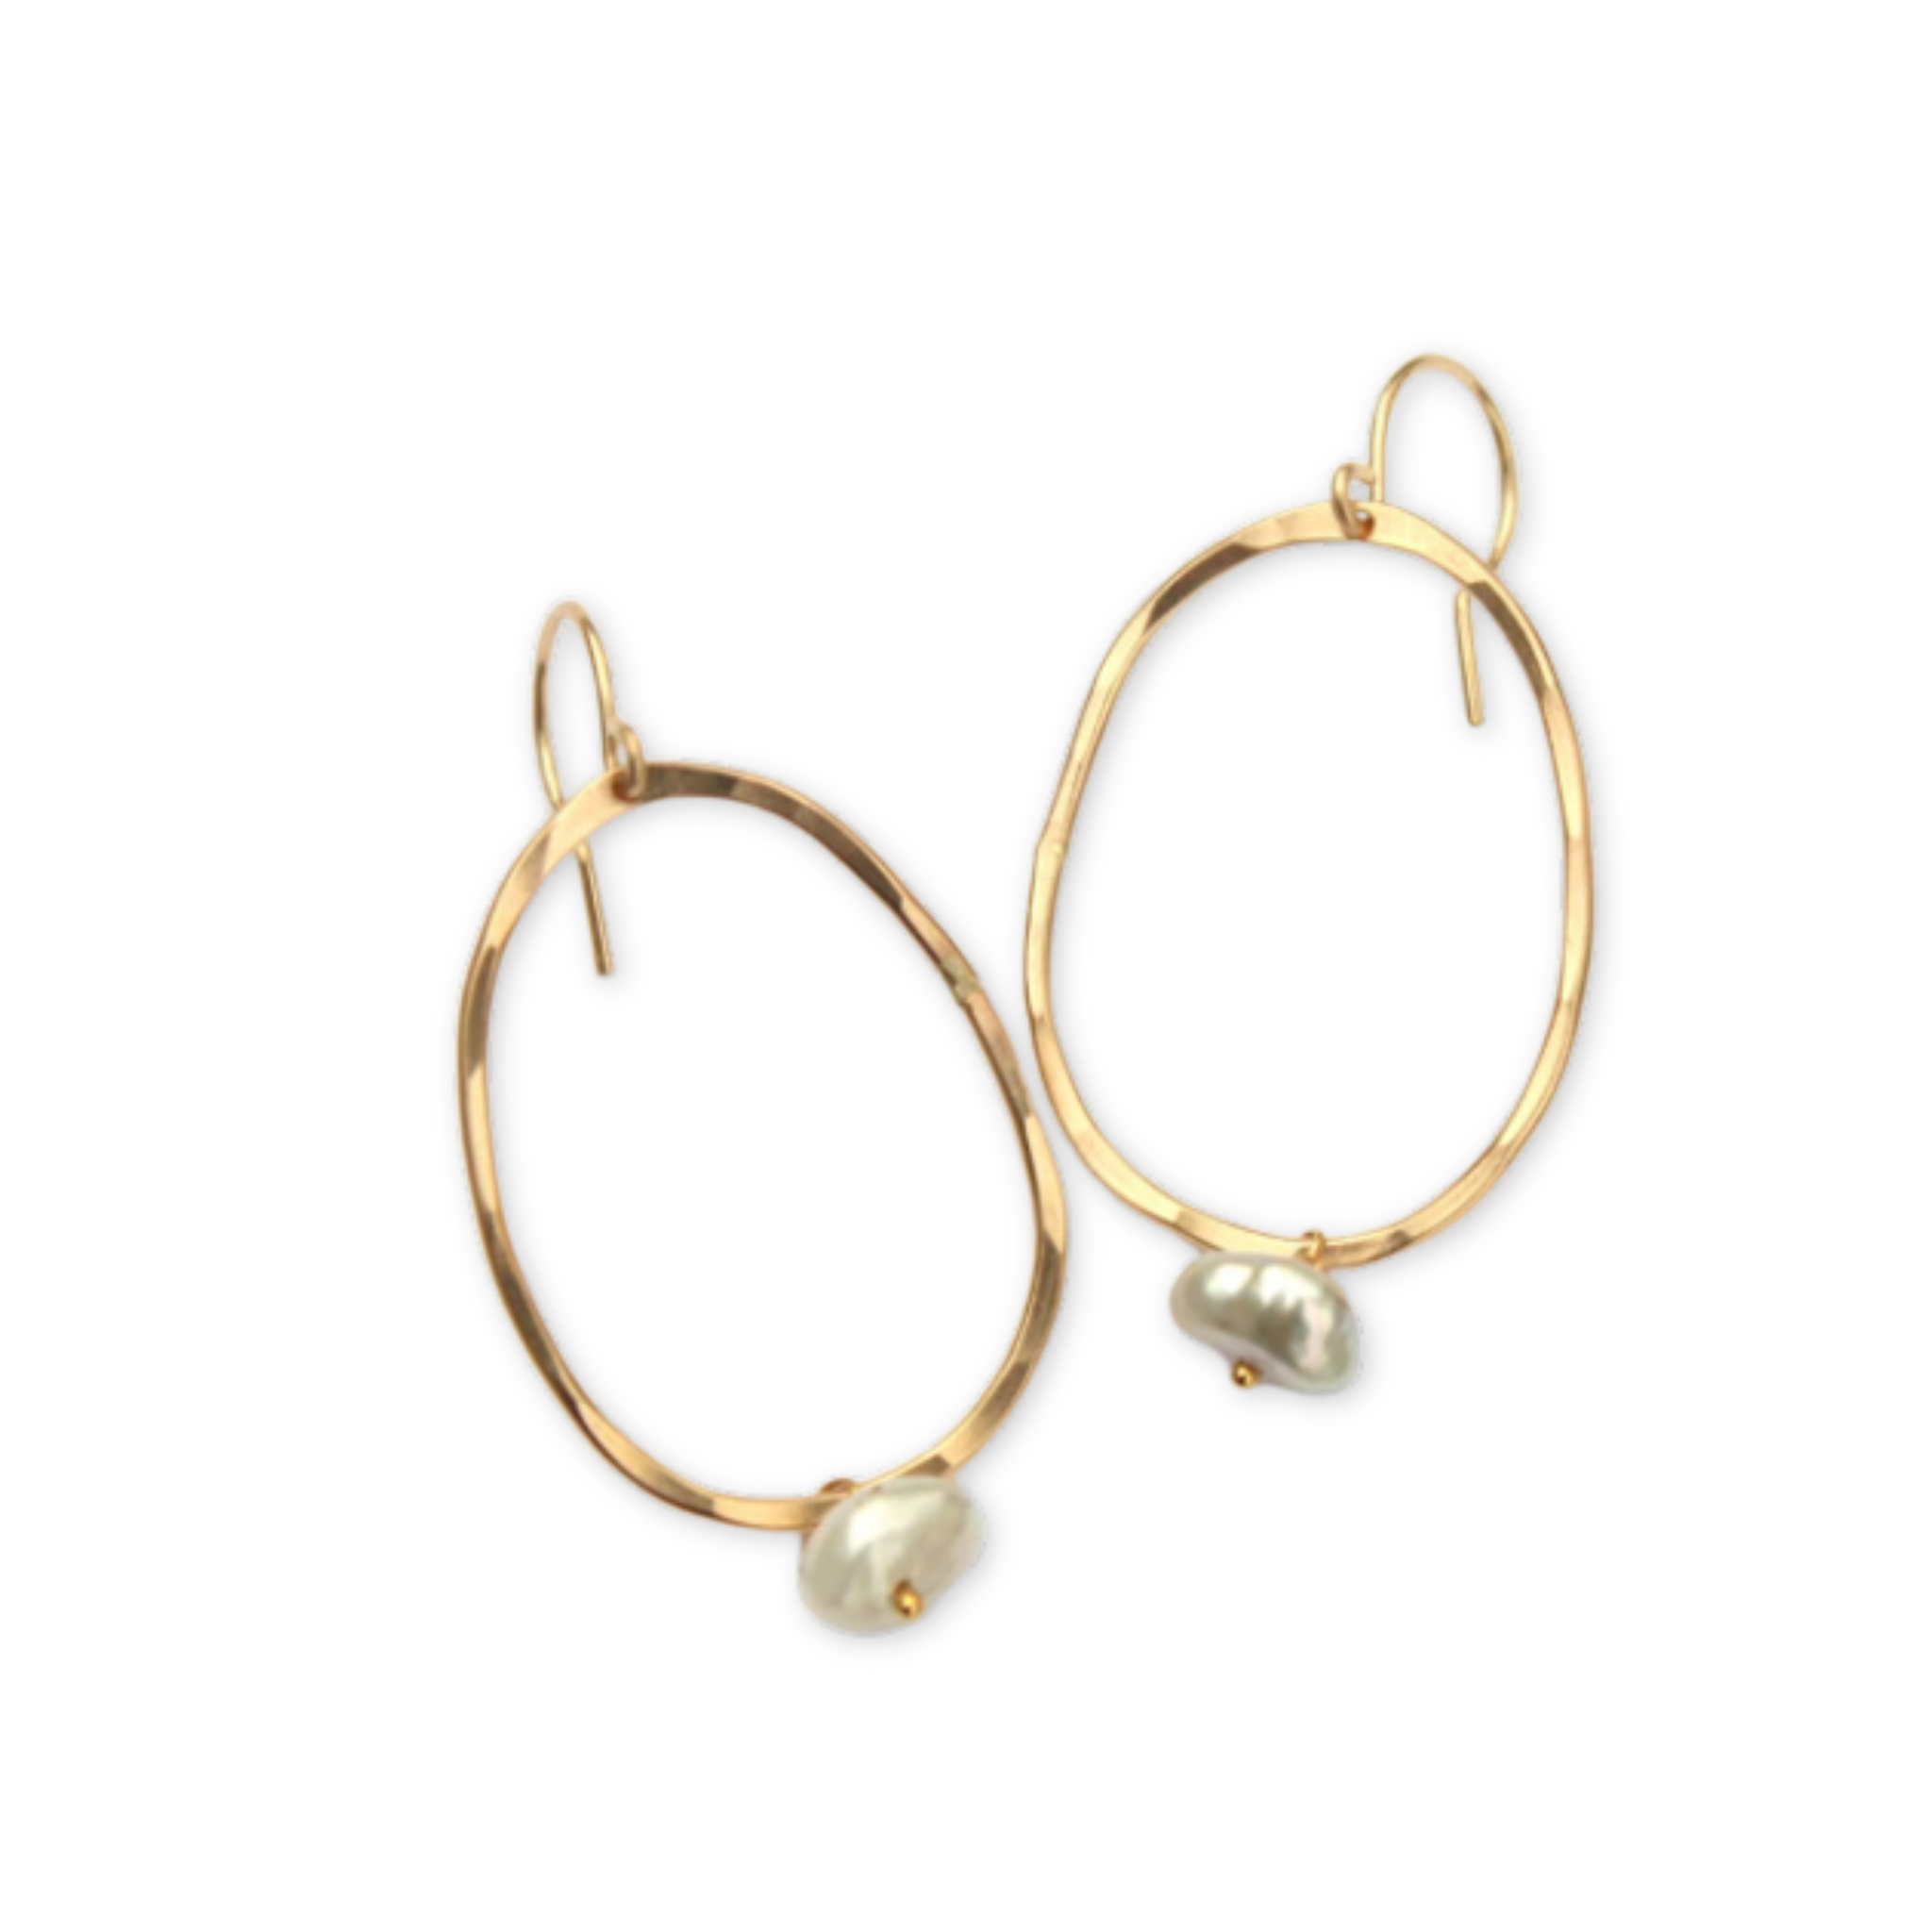 hand forged oval earrings with a hanging freshwater pearl